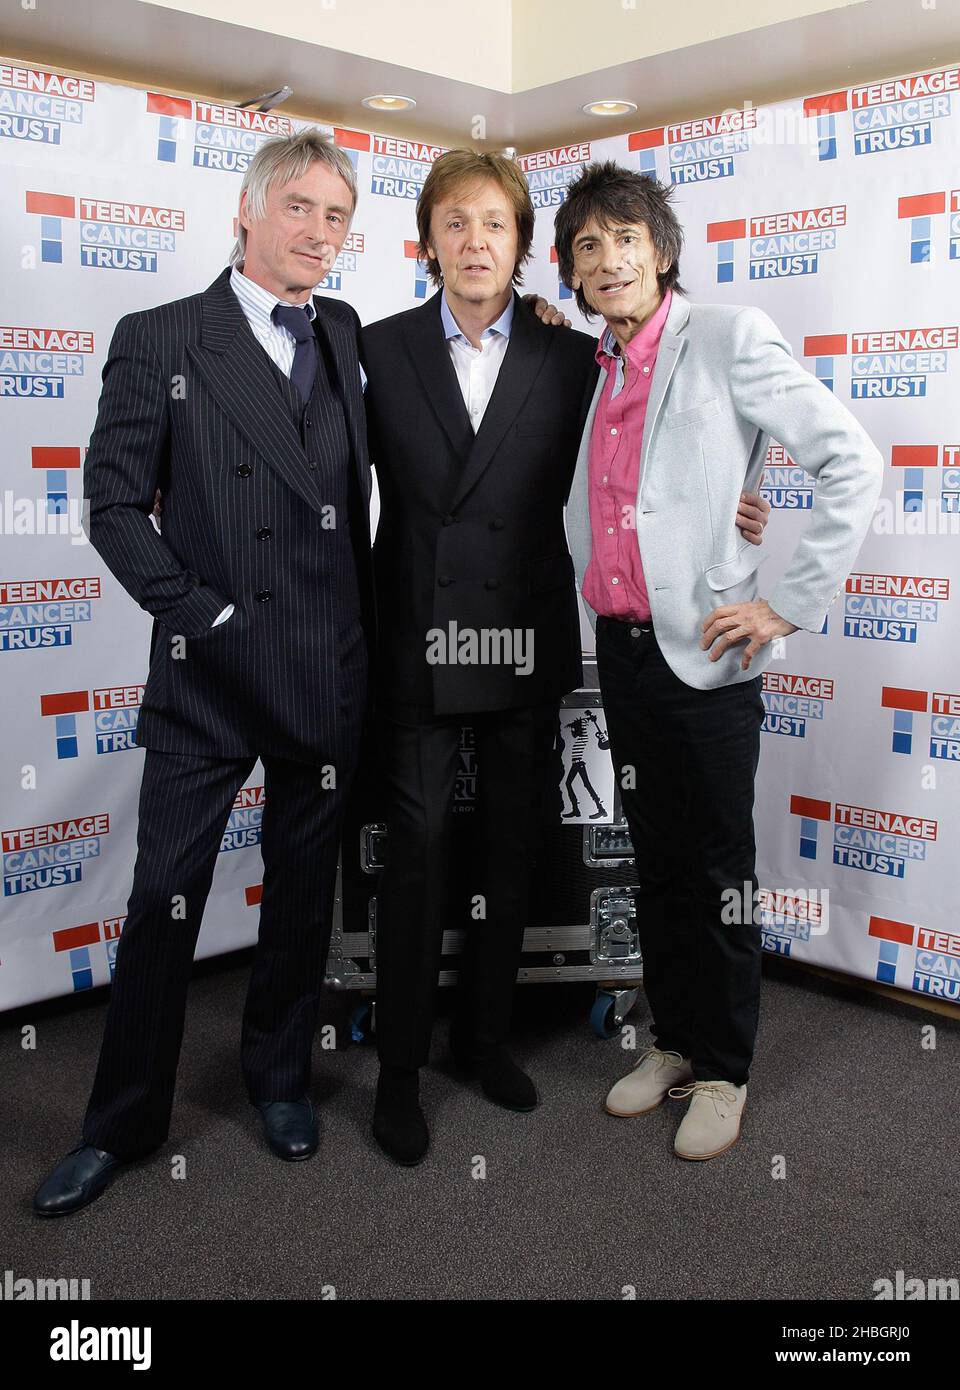 Paul Weller,Paul McCartney,Ronnie Wood backstage at the Teenage Cancer Trust at the Royal Albert Hall, London Stock Photo